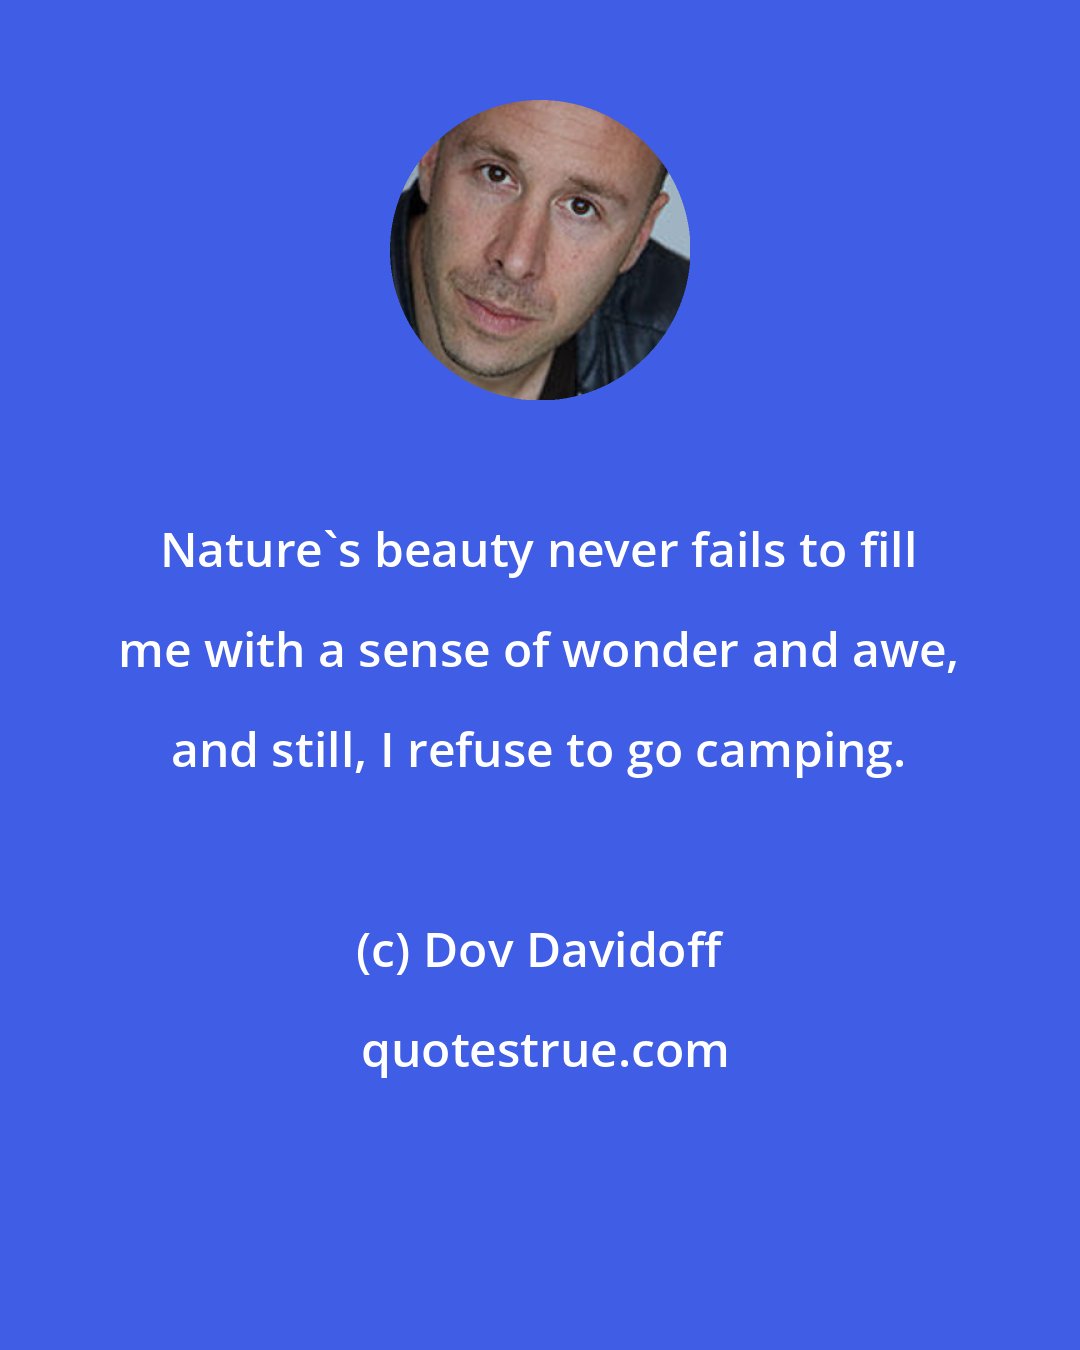 Dov Davidoff: Nature's beauty never fails to fill me with a sense of wonder and awe, and still, I refuse to go camping.